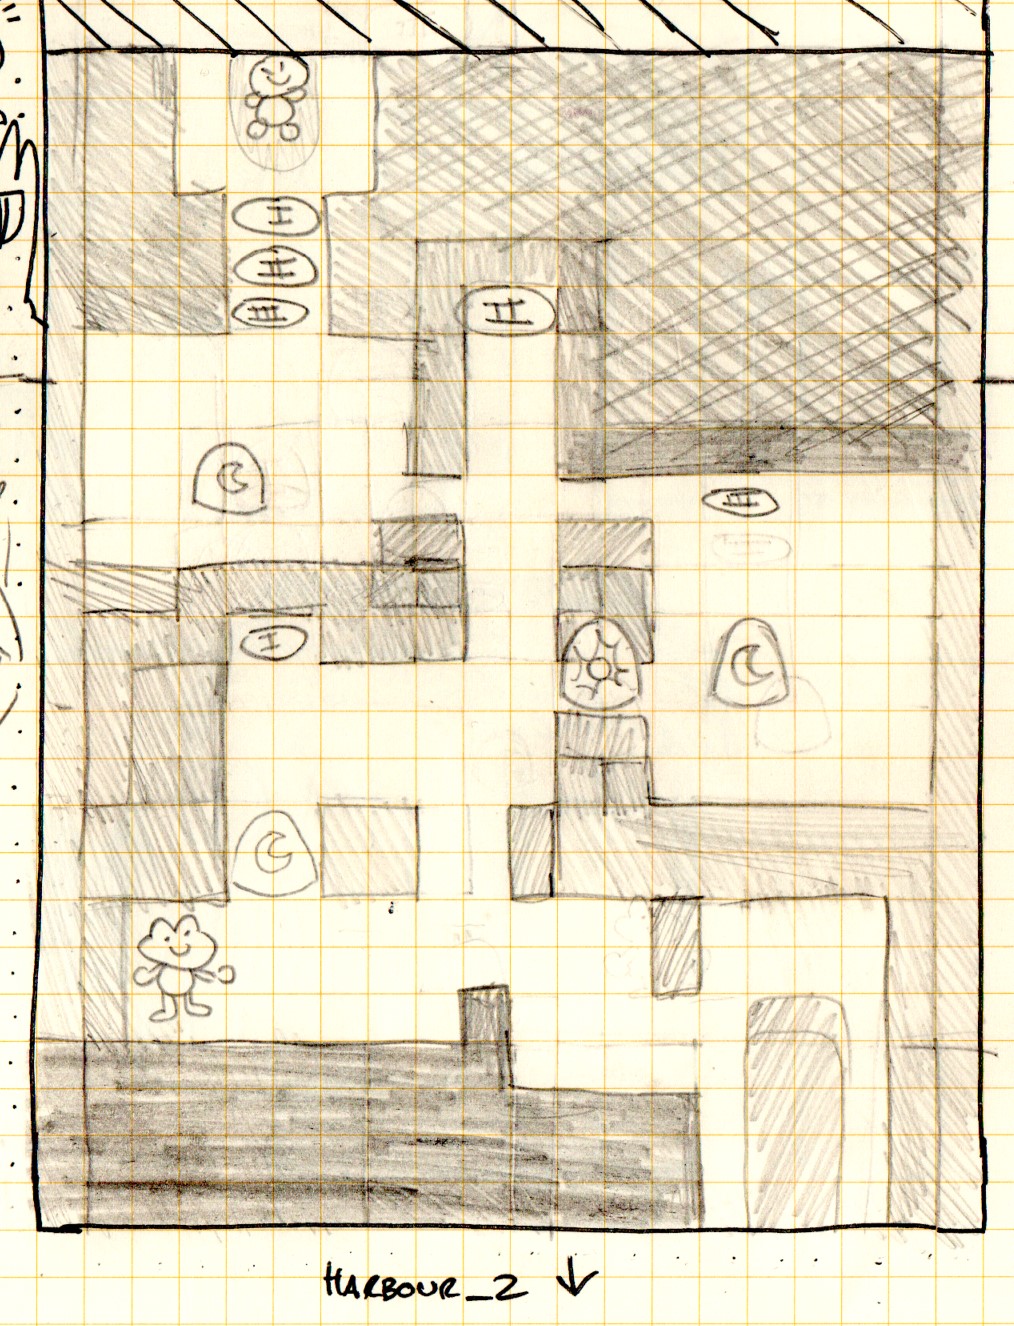 A sketch of a level.